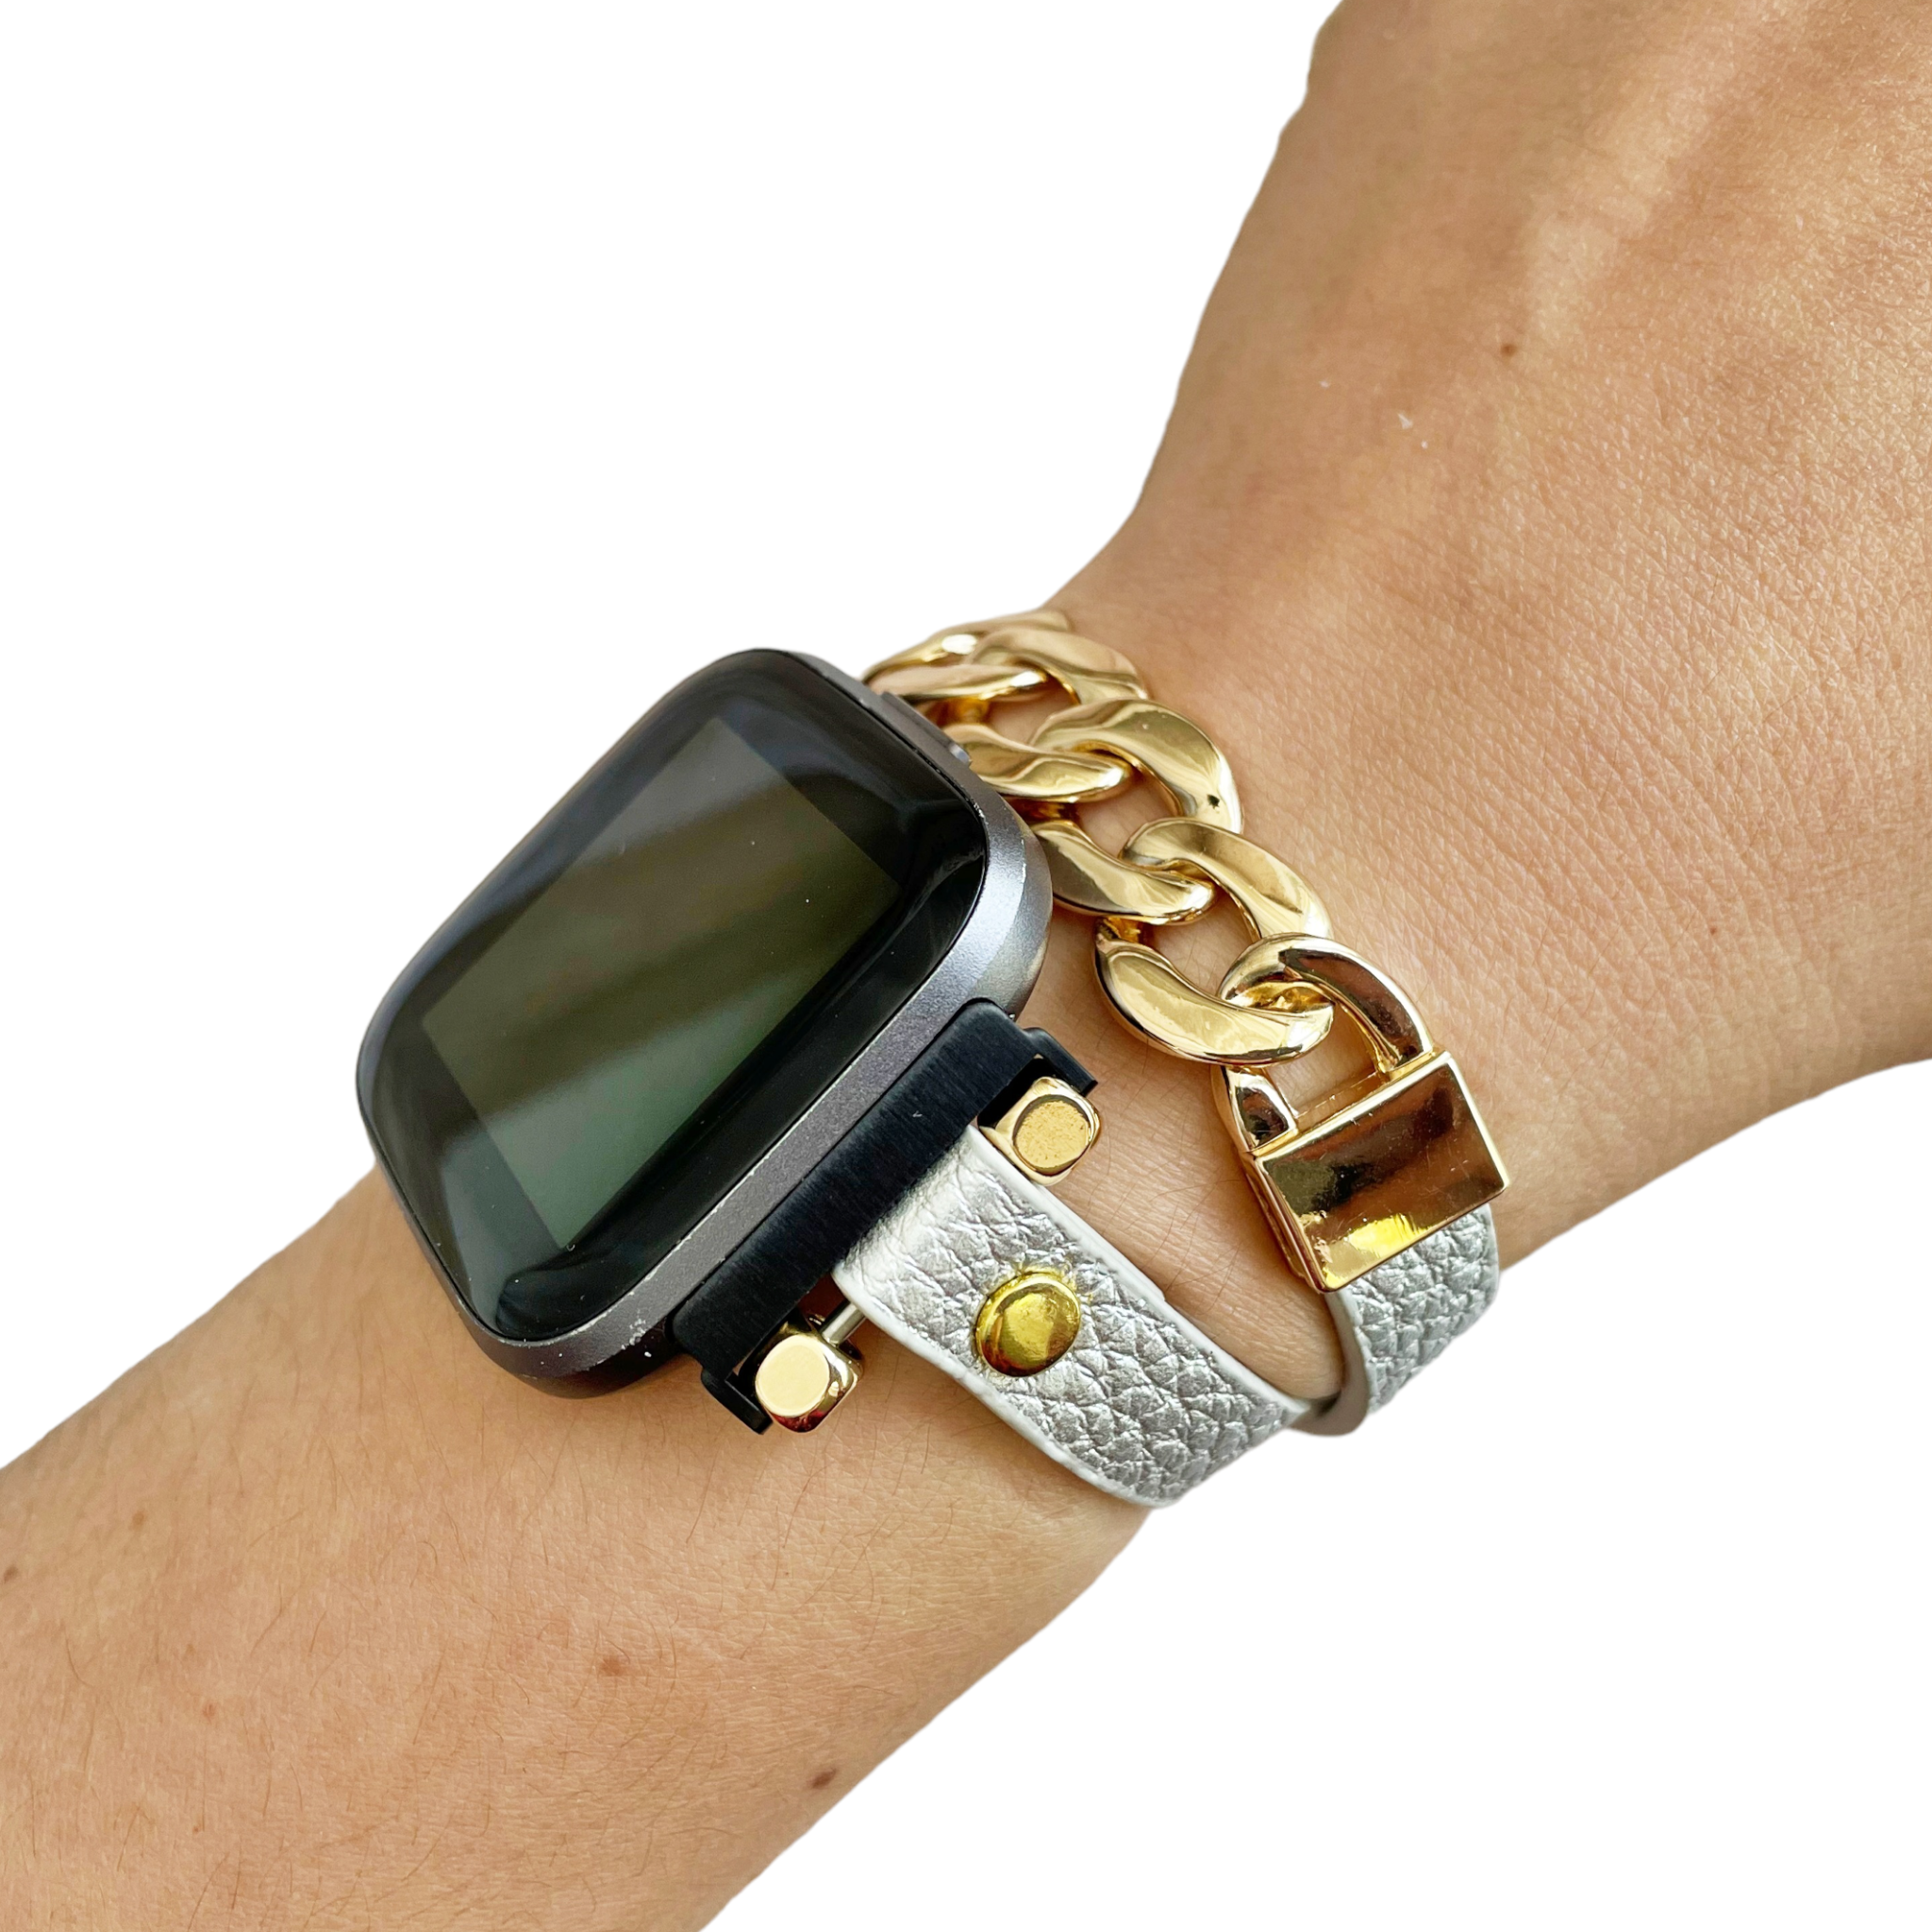 Posh Black Leather Gold Chain Wrap Watch Bracelet Band for Fitbit Versa 3 and Sense